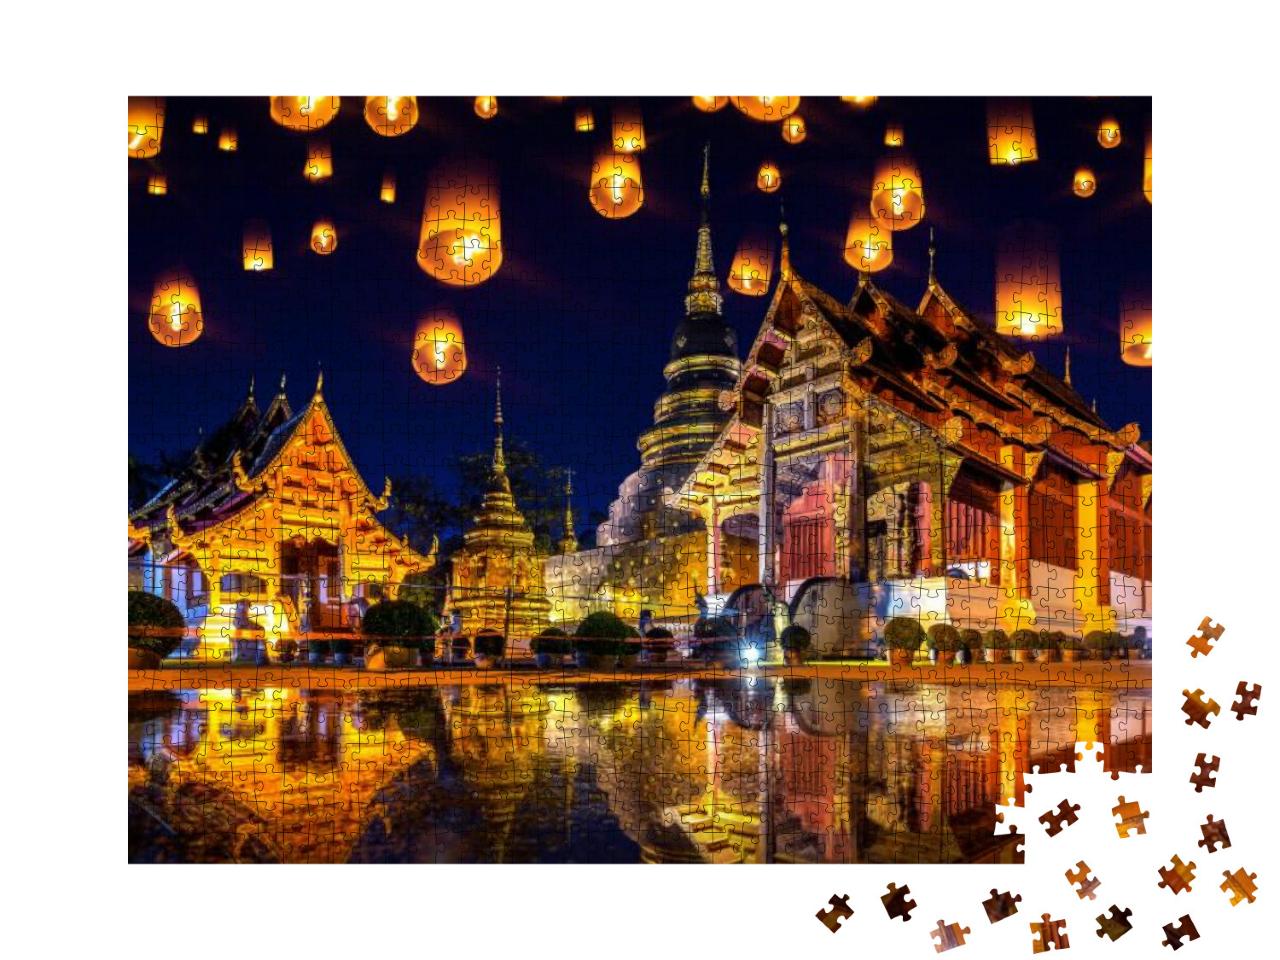 Yee Peng Festival & Sky Lanterns At Wat Phra Singh Temple... Jigsaw Puzzle with 1000 pieces